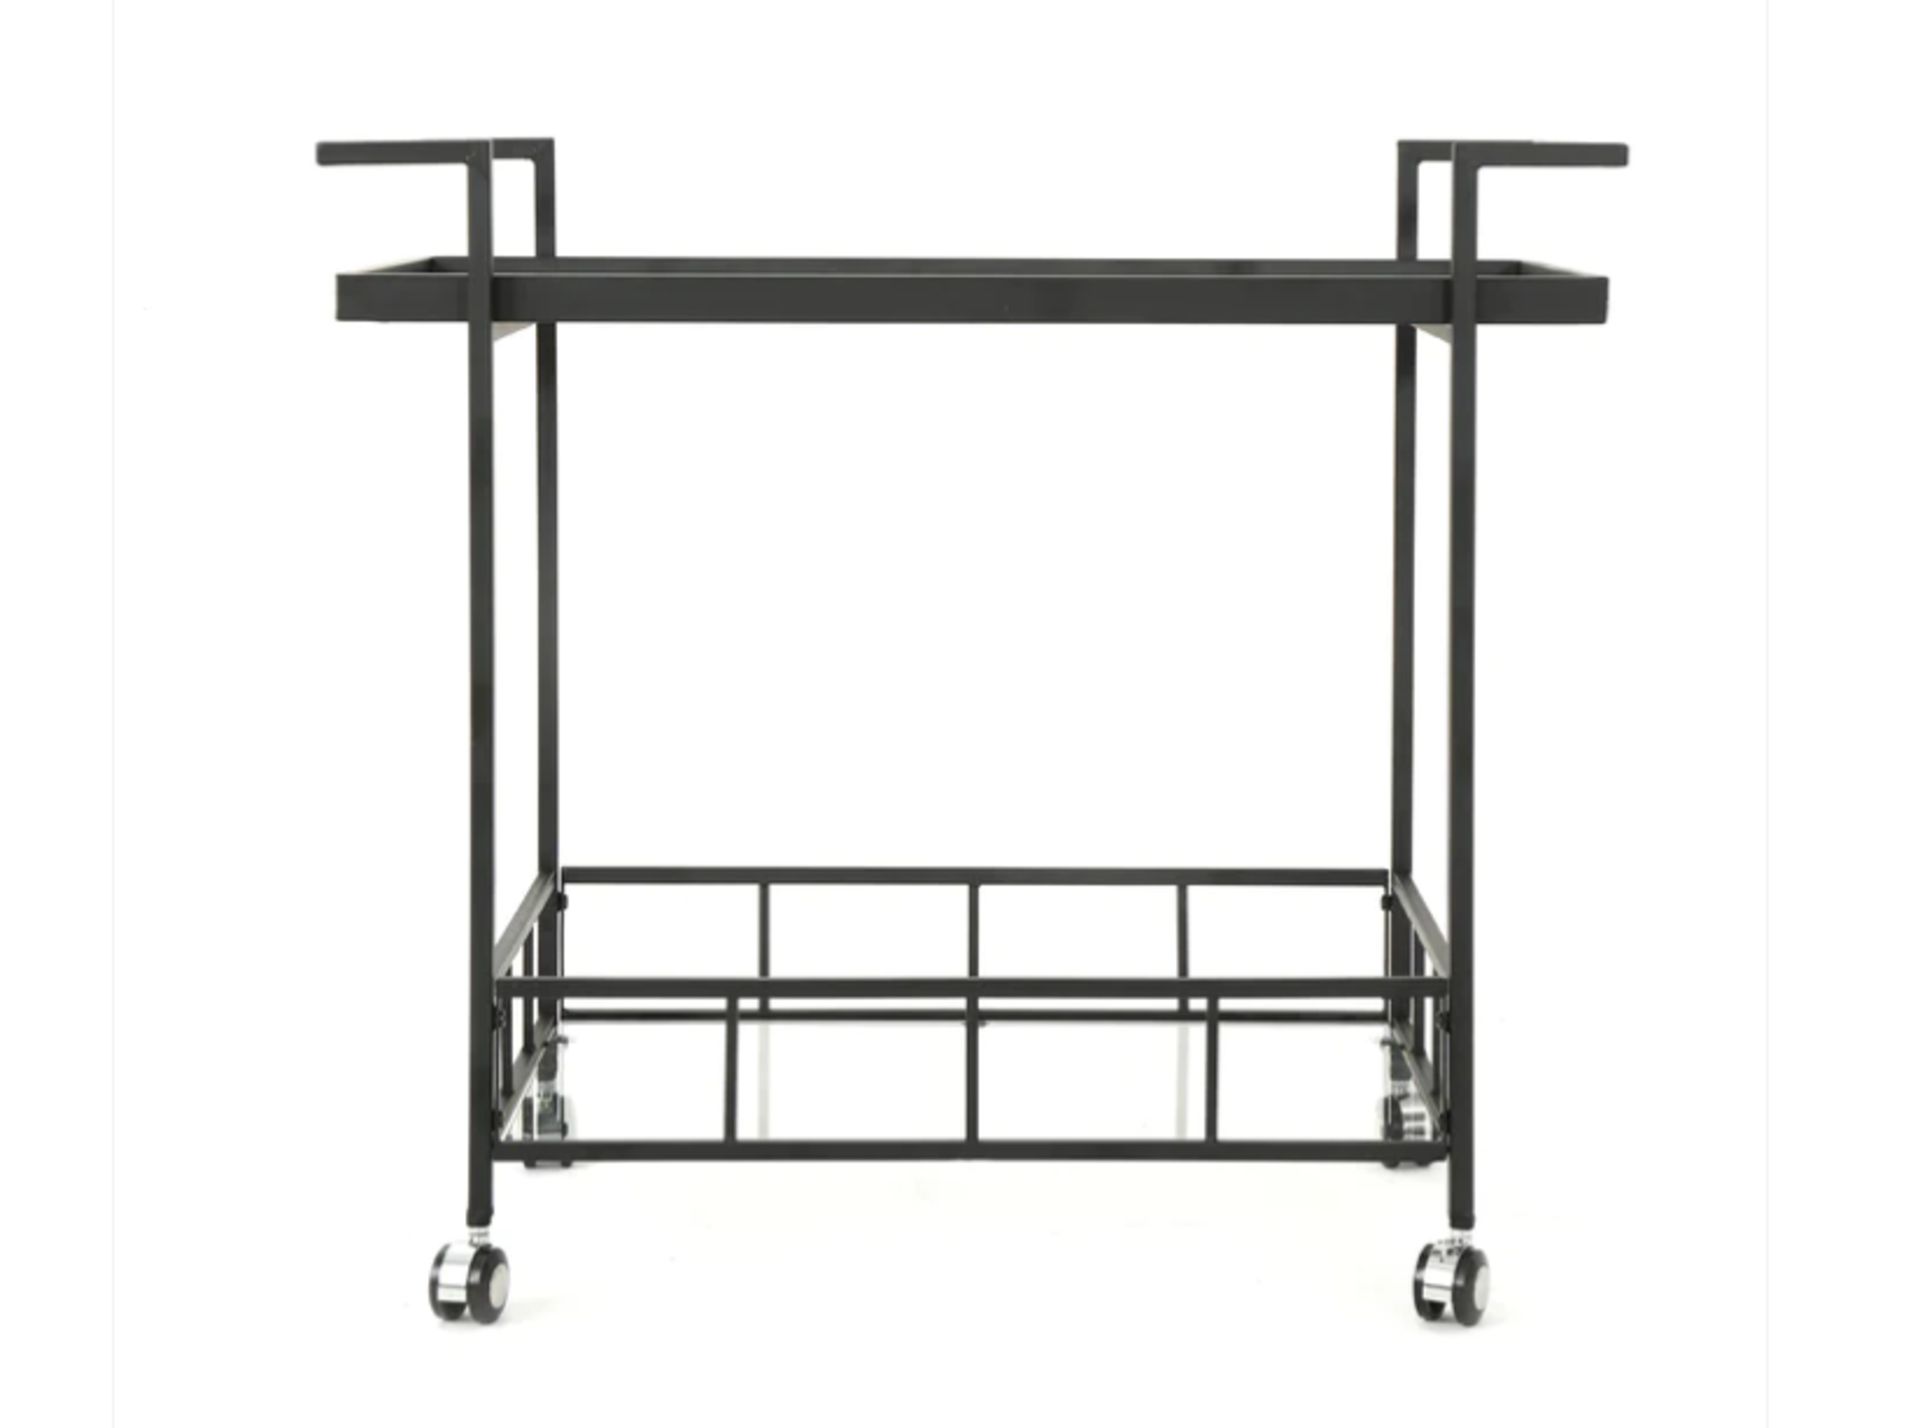 **(BRAND NEW SEALED BOX)** INDOOR INDUSTRIAL BLACK IRON BAR CART WITH TEMPERED GLASS SHELVES